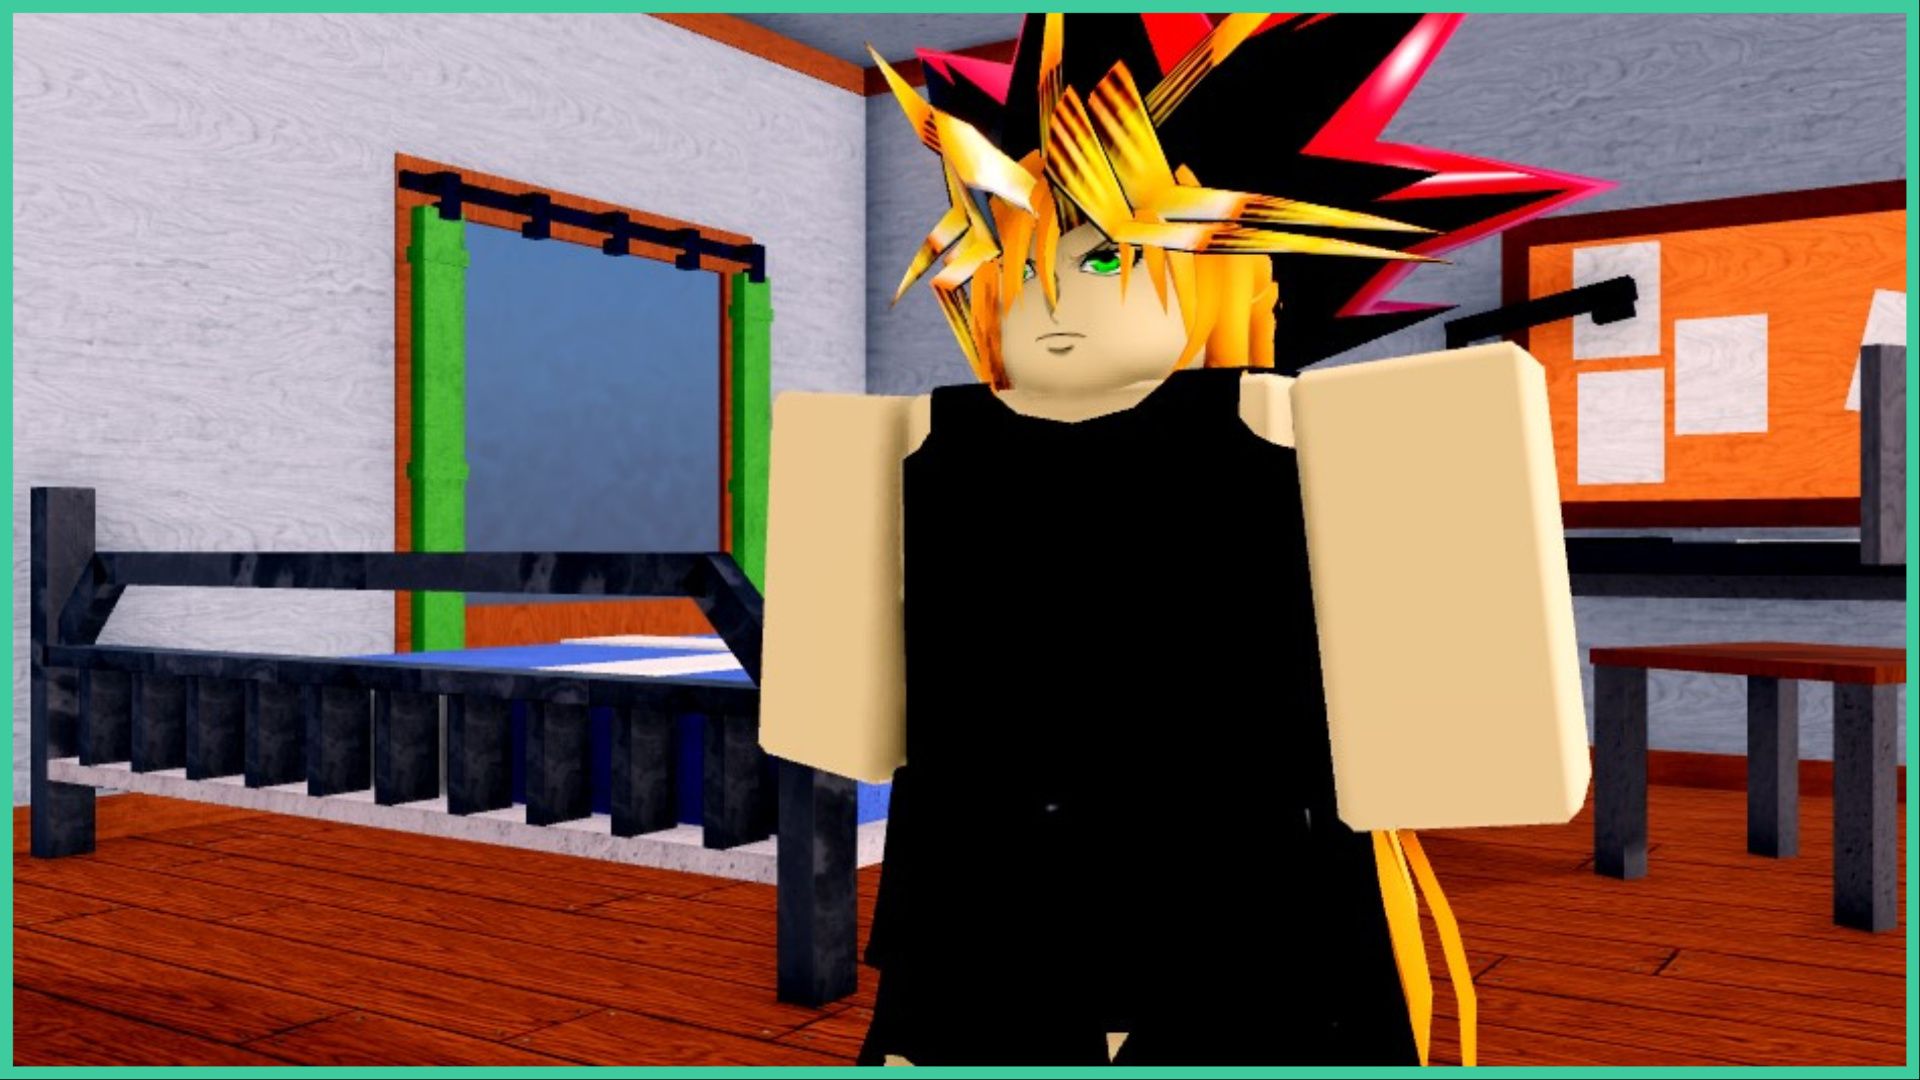 feature image for our project mugetsu clans guide, the image is a screenshot from the character customisation screen of a roblox character with long orange hair, with the top resembling yugi mutou's hair from the yu gi oh franchise, with neon green eyes and a stern expression on their face